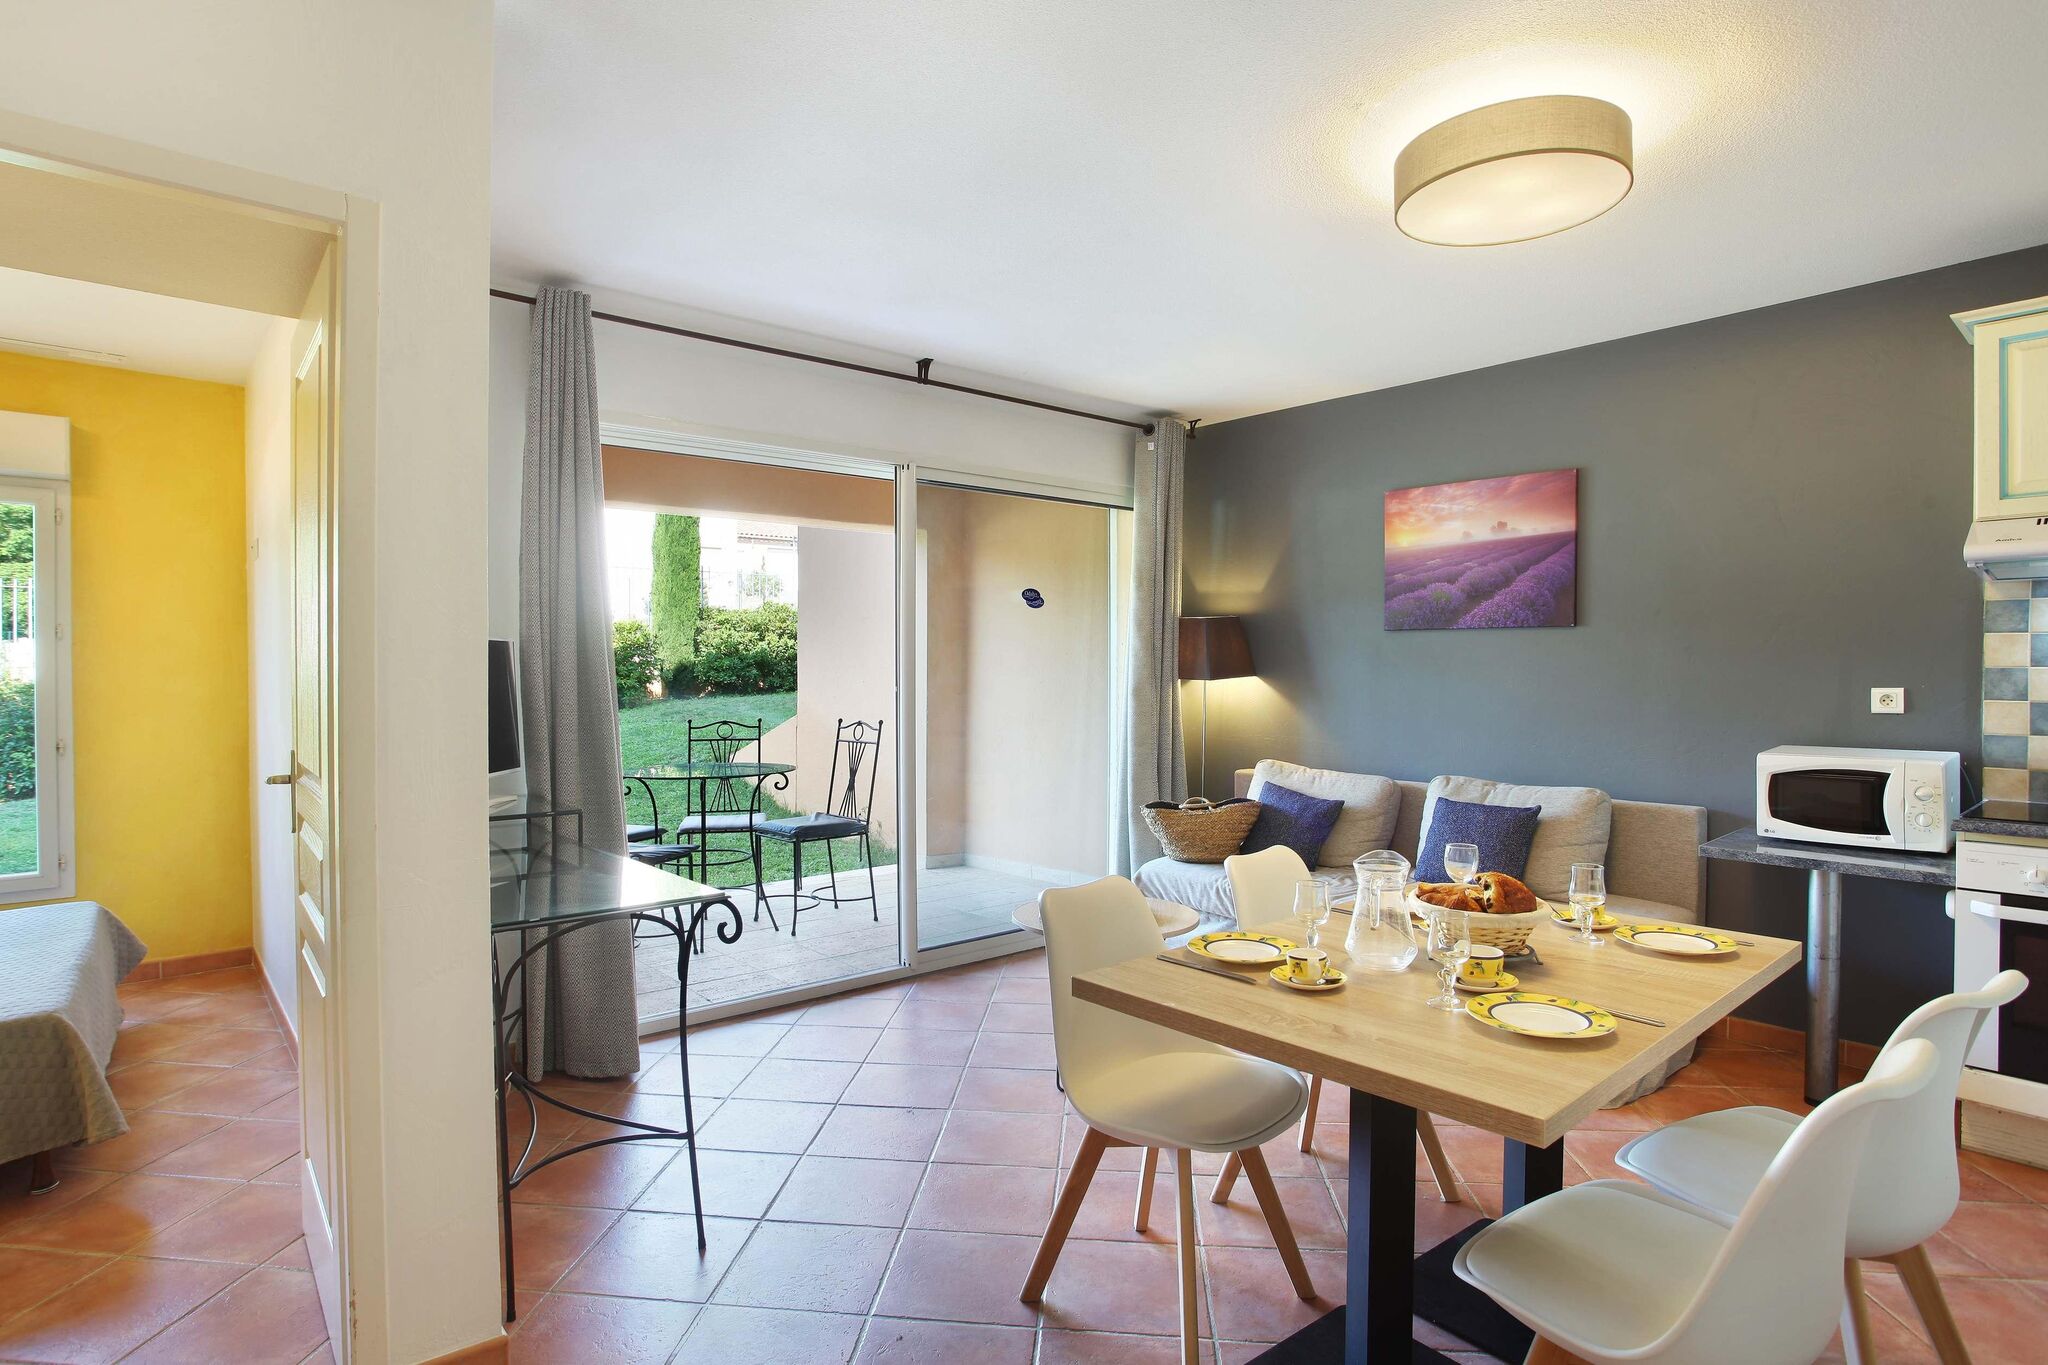 Nice apartment with dishwasher in Gréoux-les-Bains